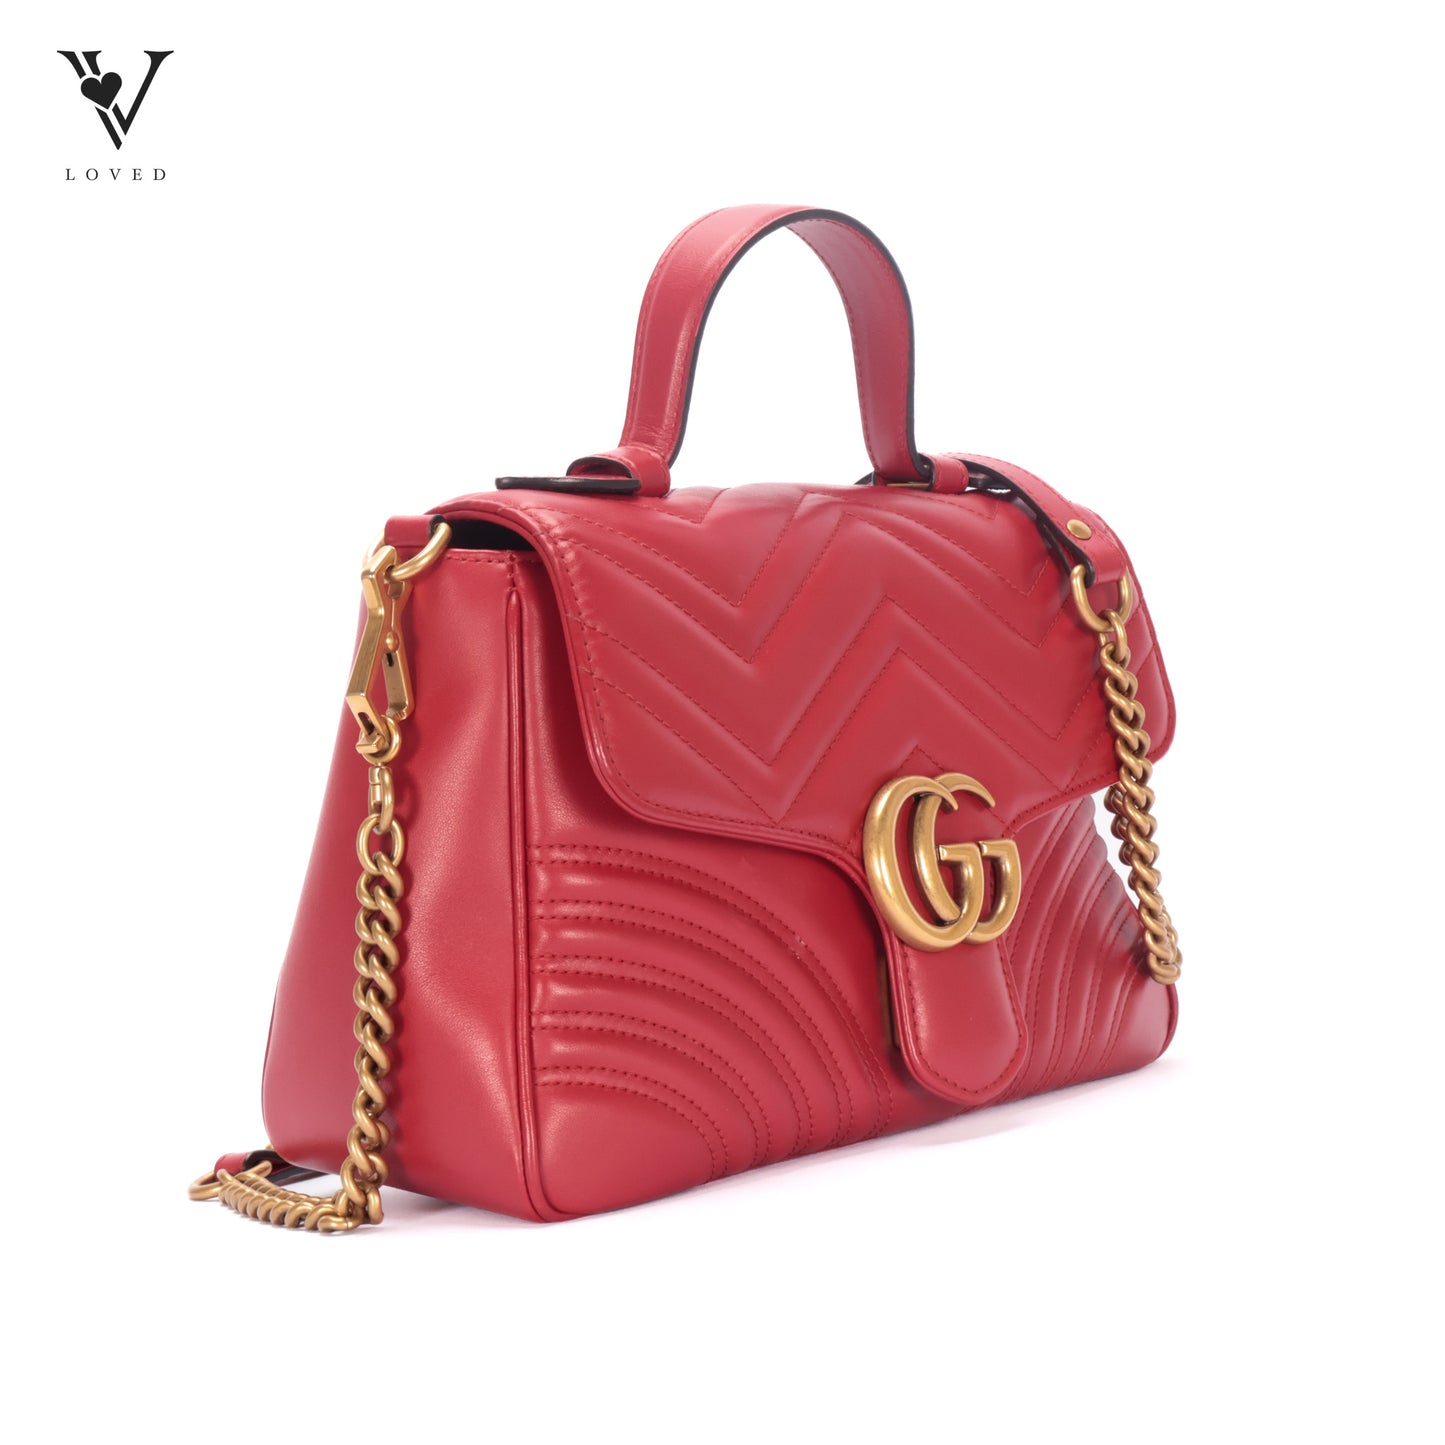 GG Marmont Top Handle in Quilted Calfskin Leather